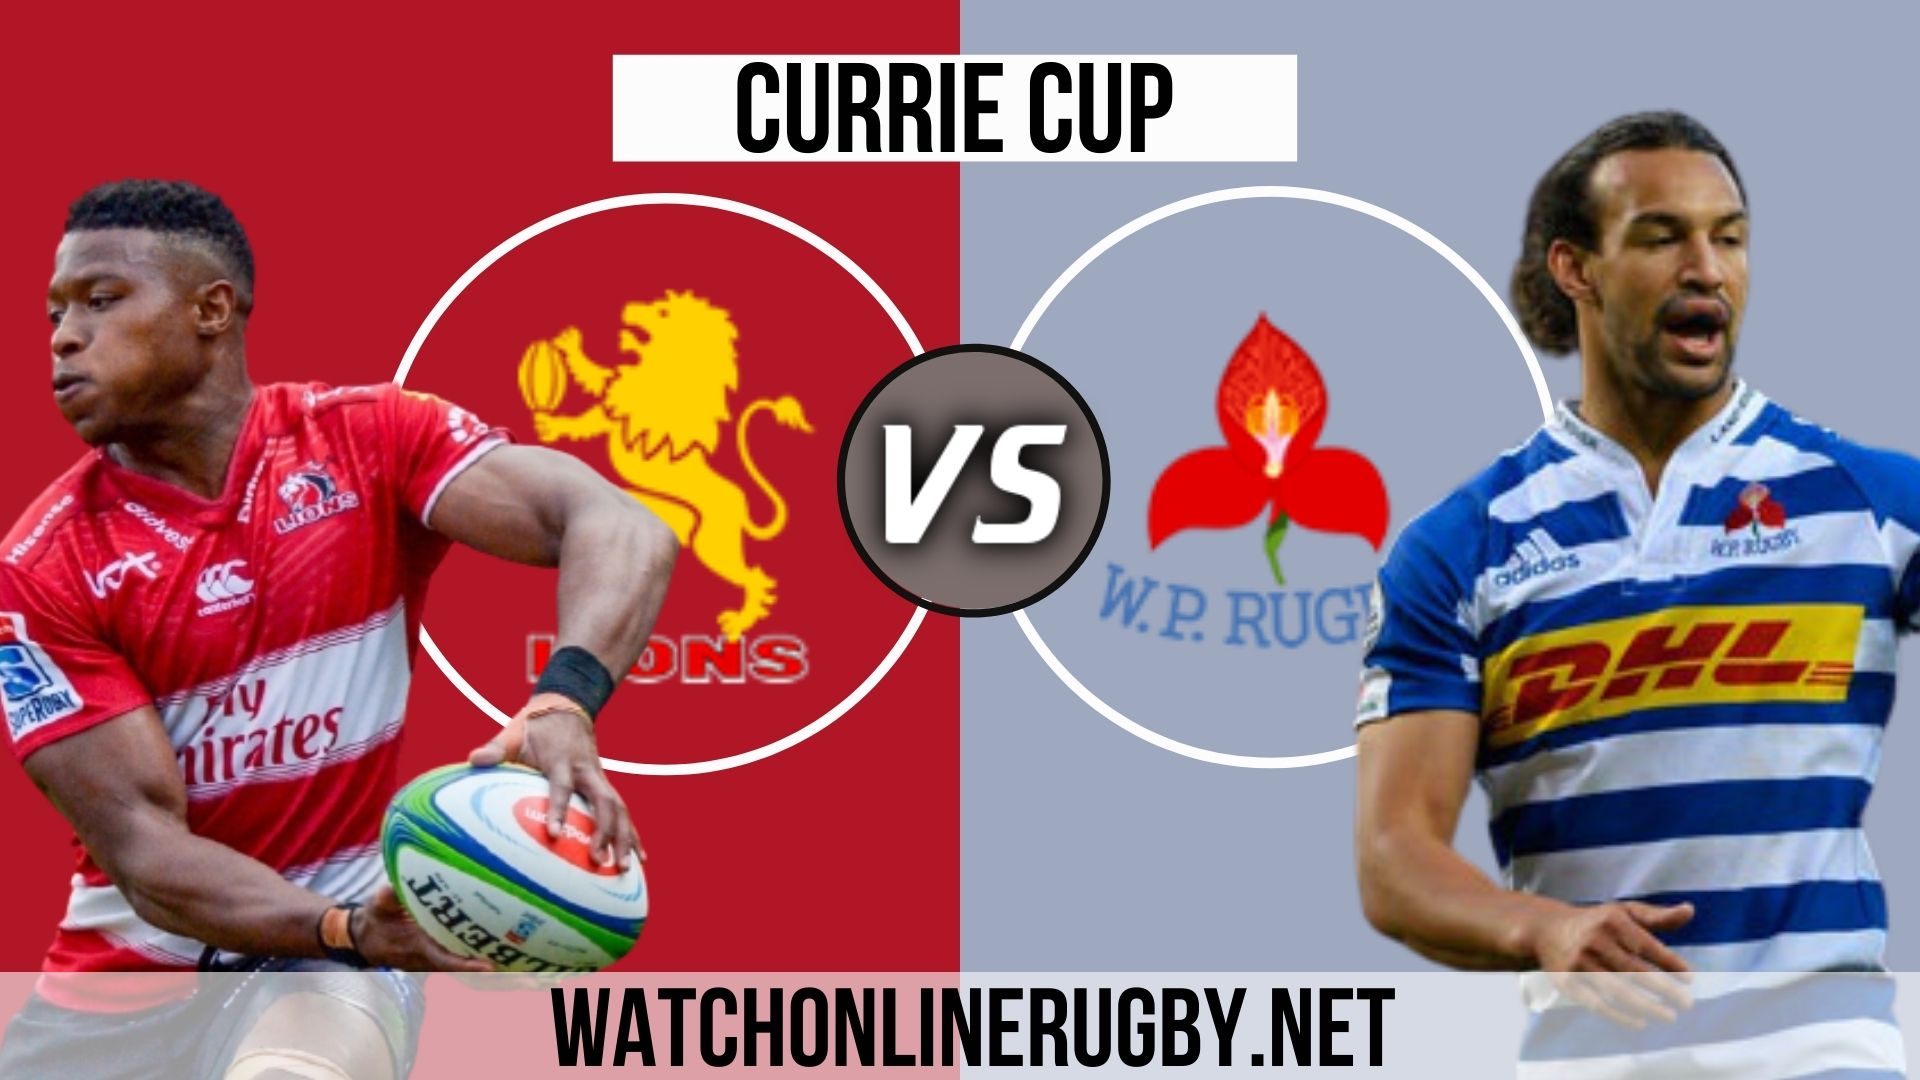 Lions Vs Western Province Currie Cup 2020